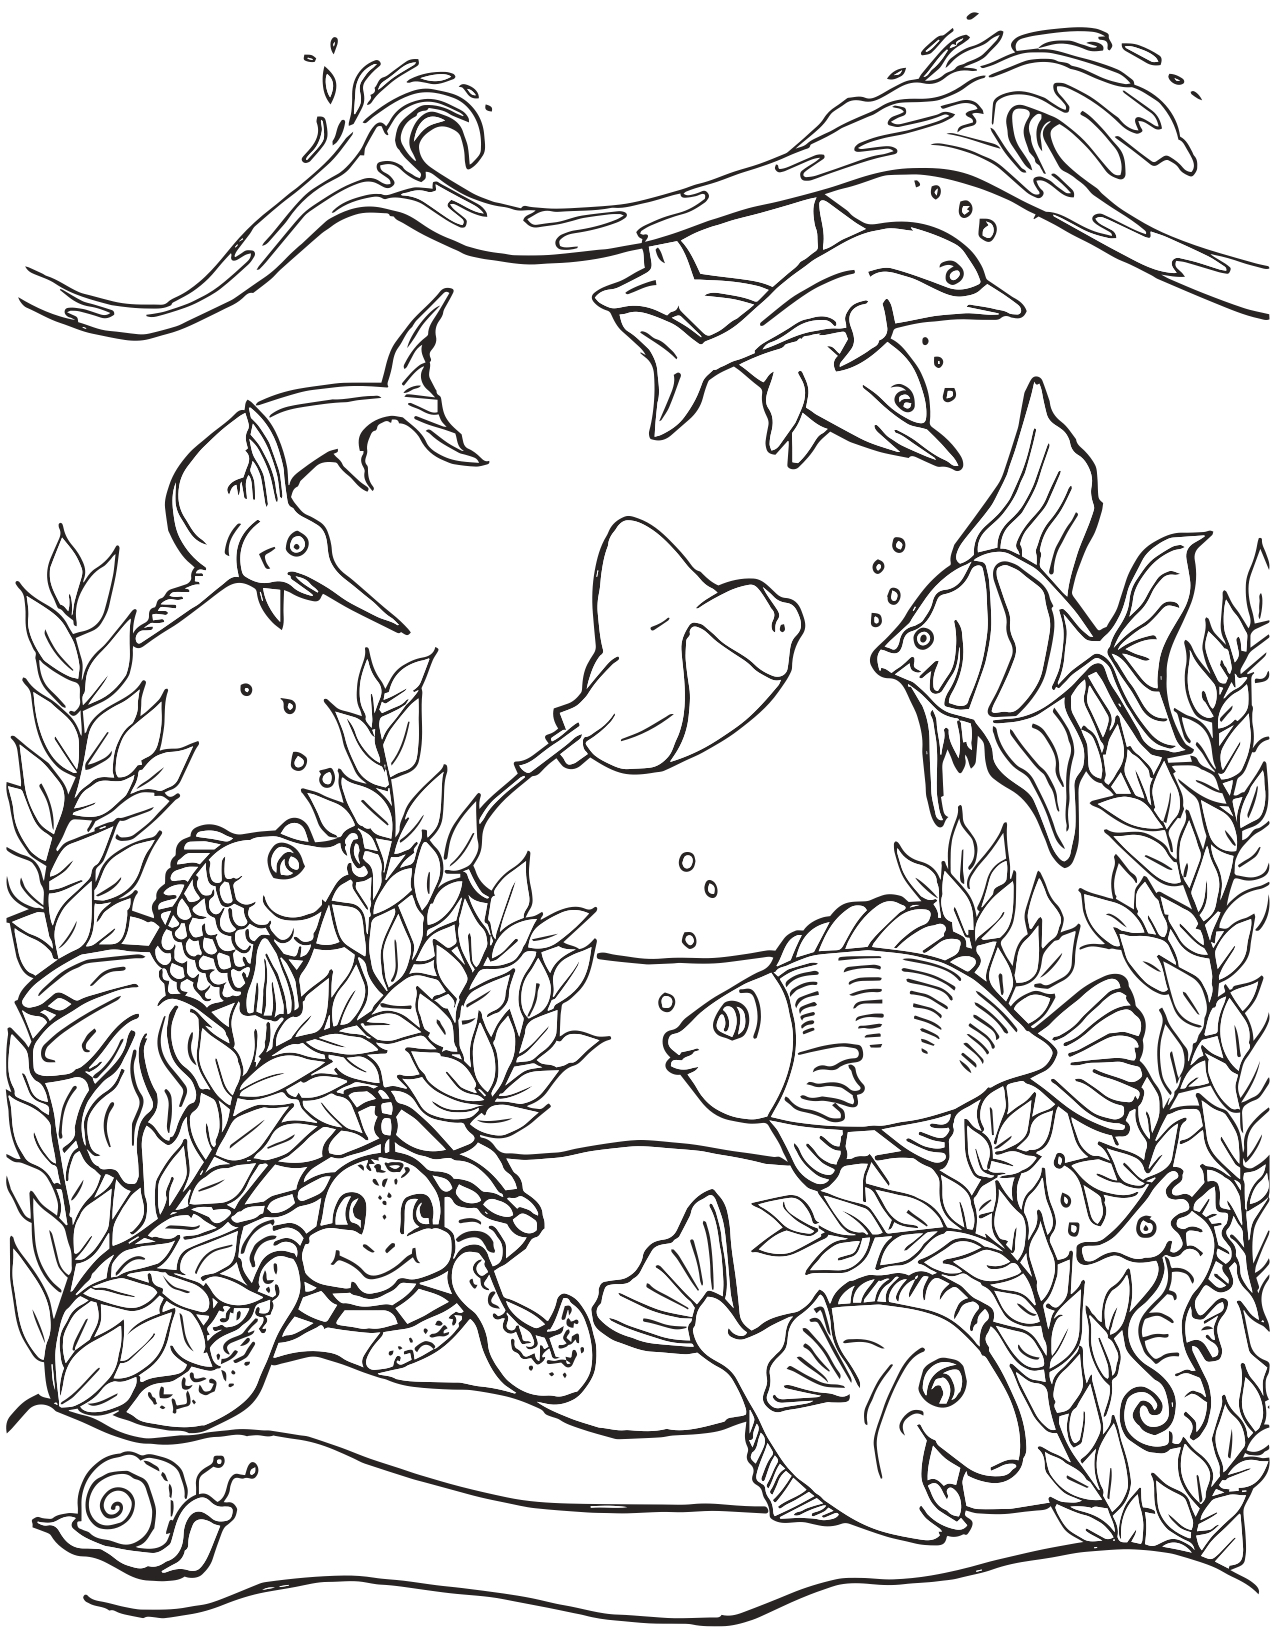 Download Sea Life - Mermaid Coloring Pages